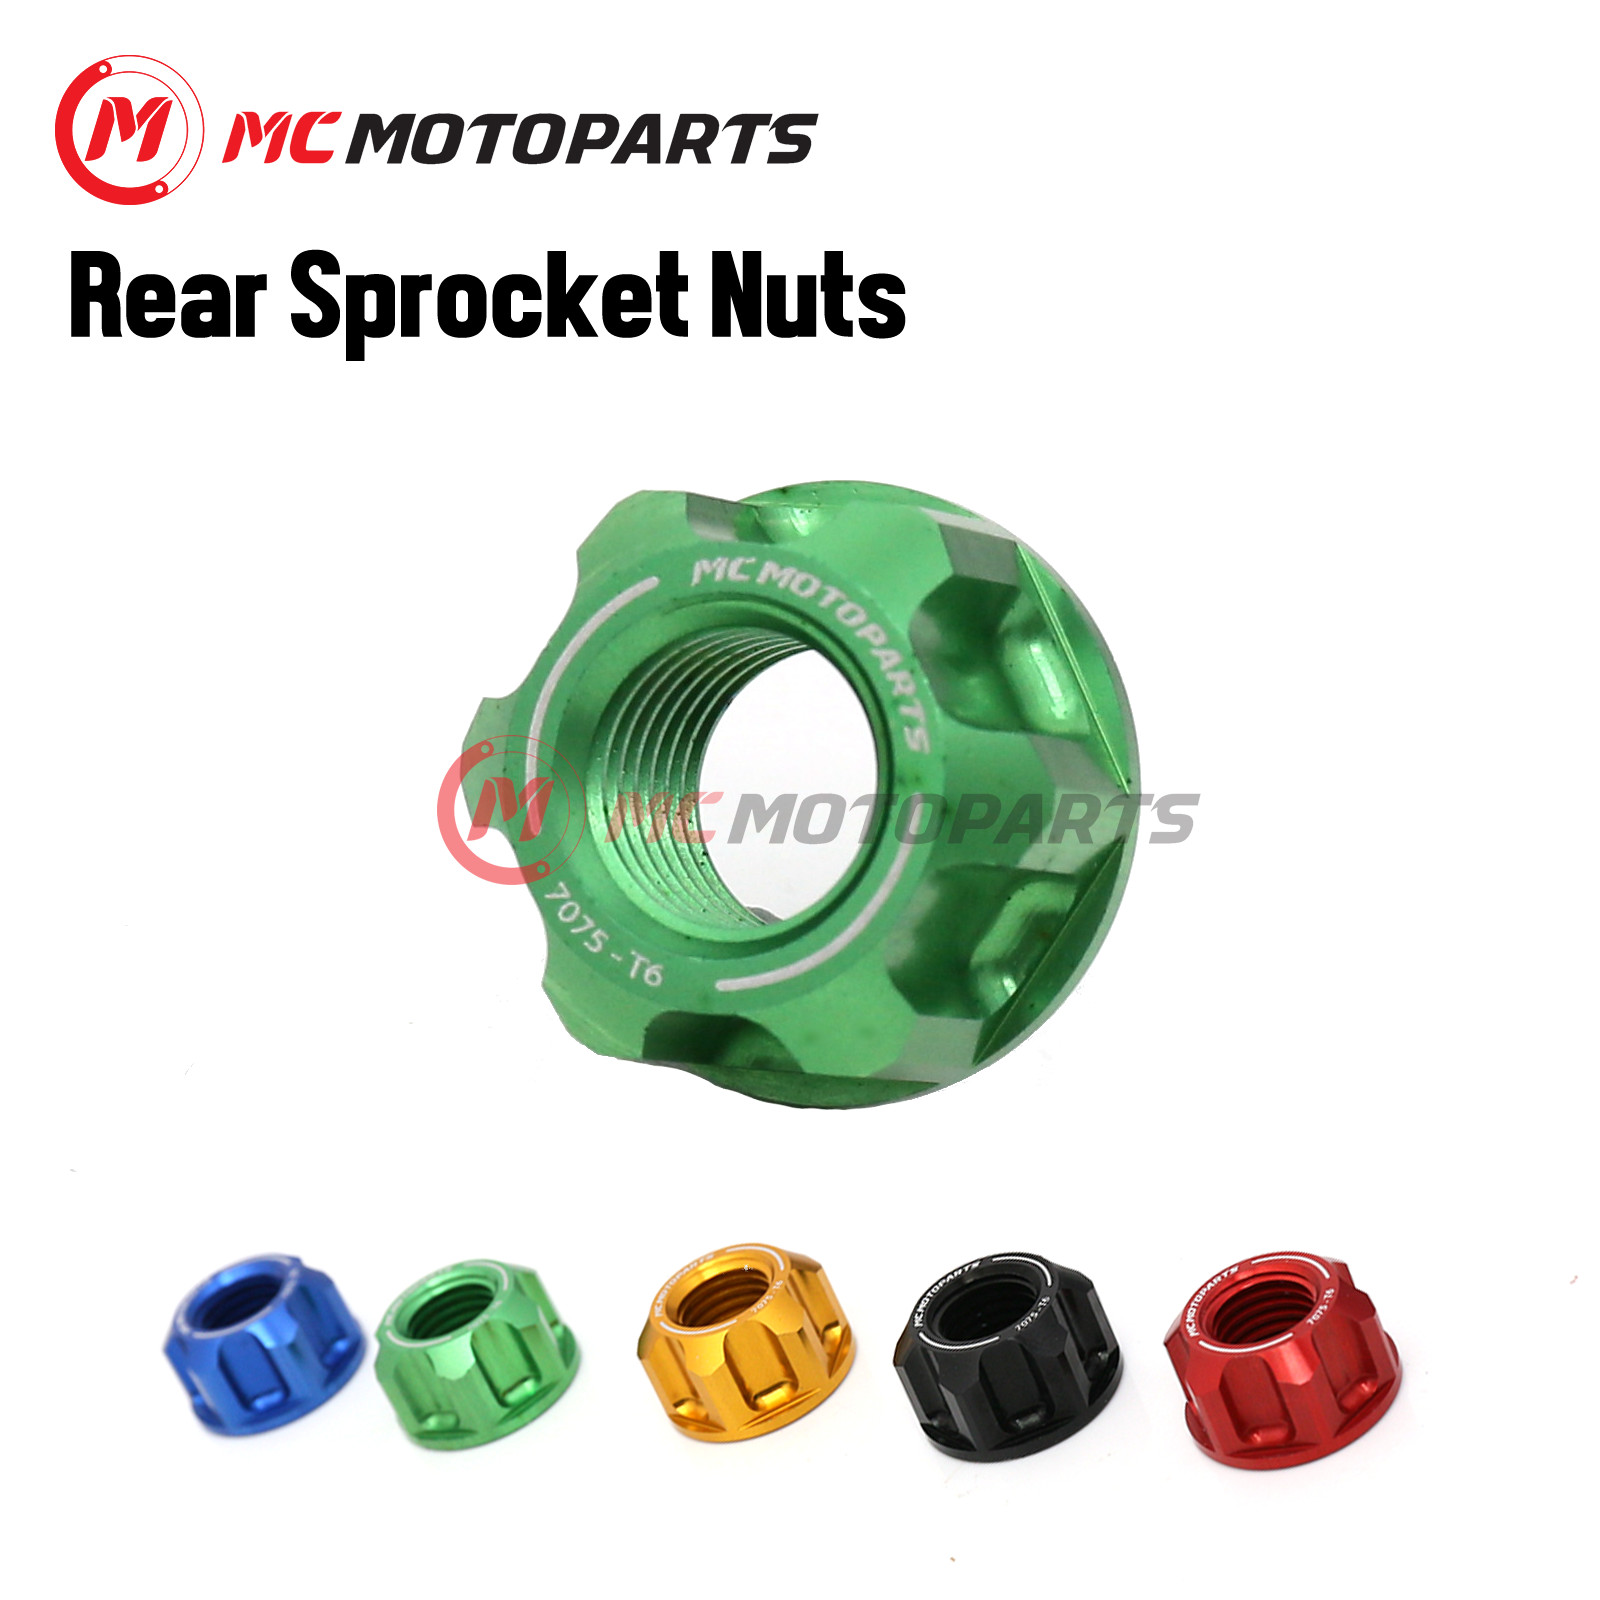 Details About Mc Motoparts Spoke6 Billet Rear Sprocket Nuts For Yamaha Yzf R1 R6 750 Yzf1000r